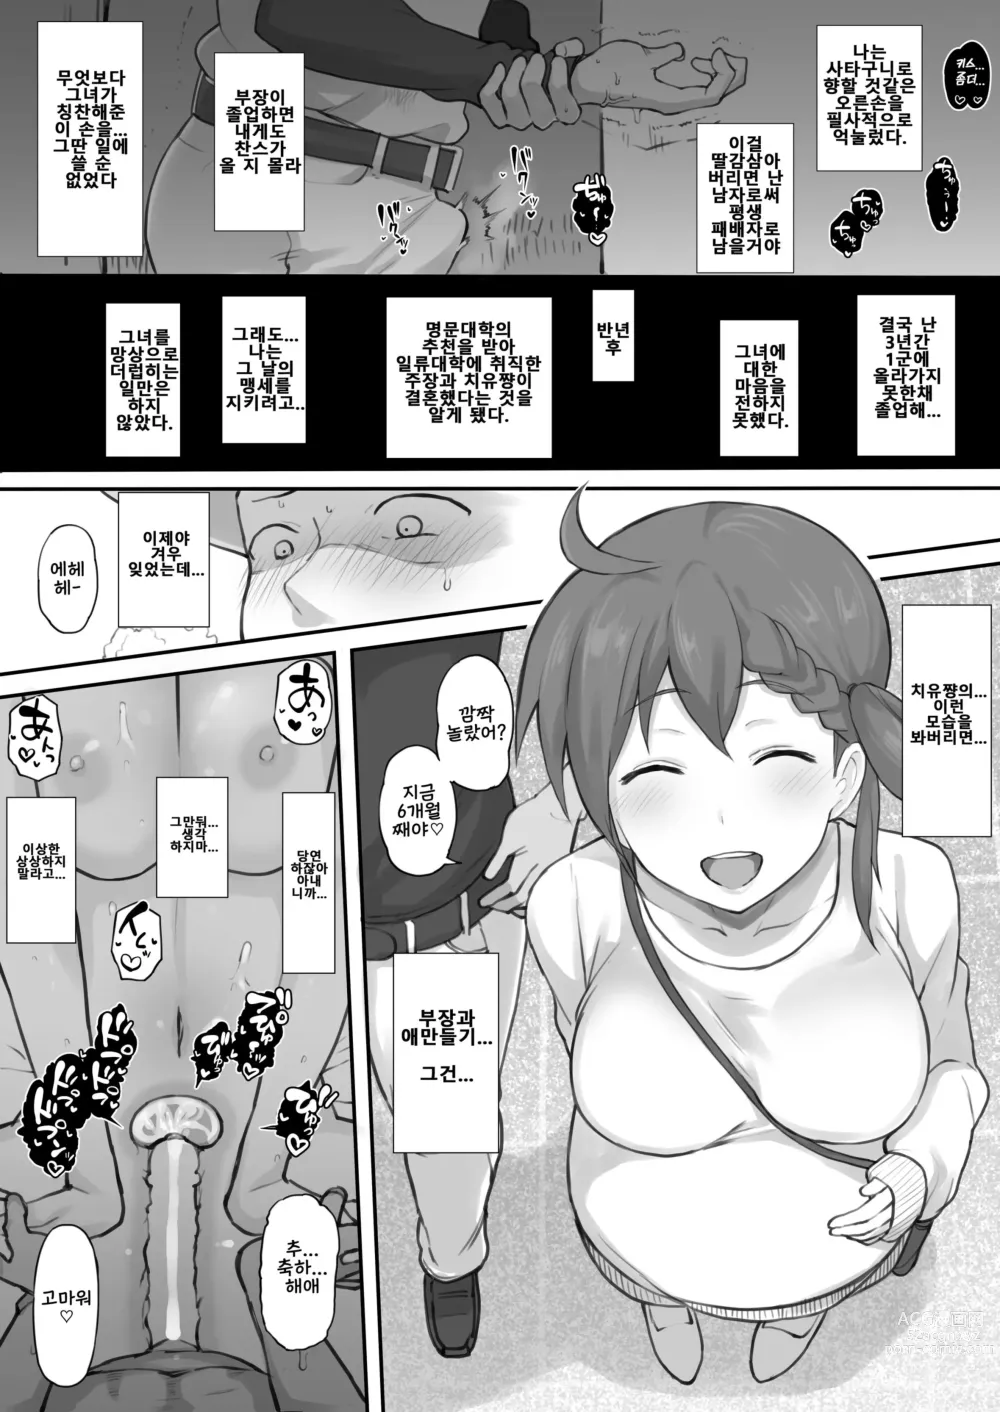 Page 7 of doujinshi Untitled BSS Comics (decensored)